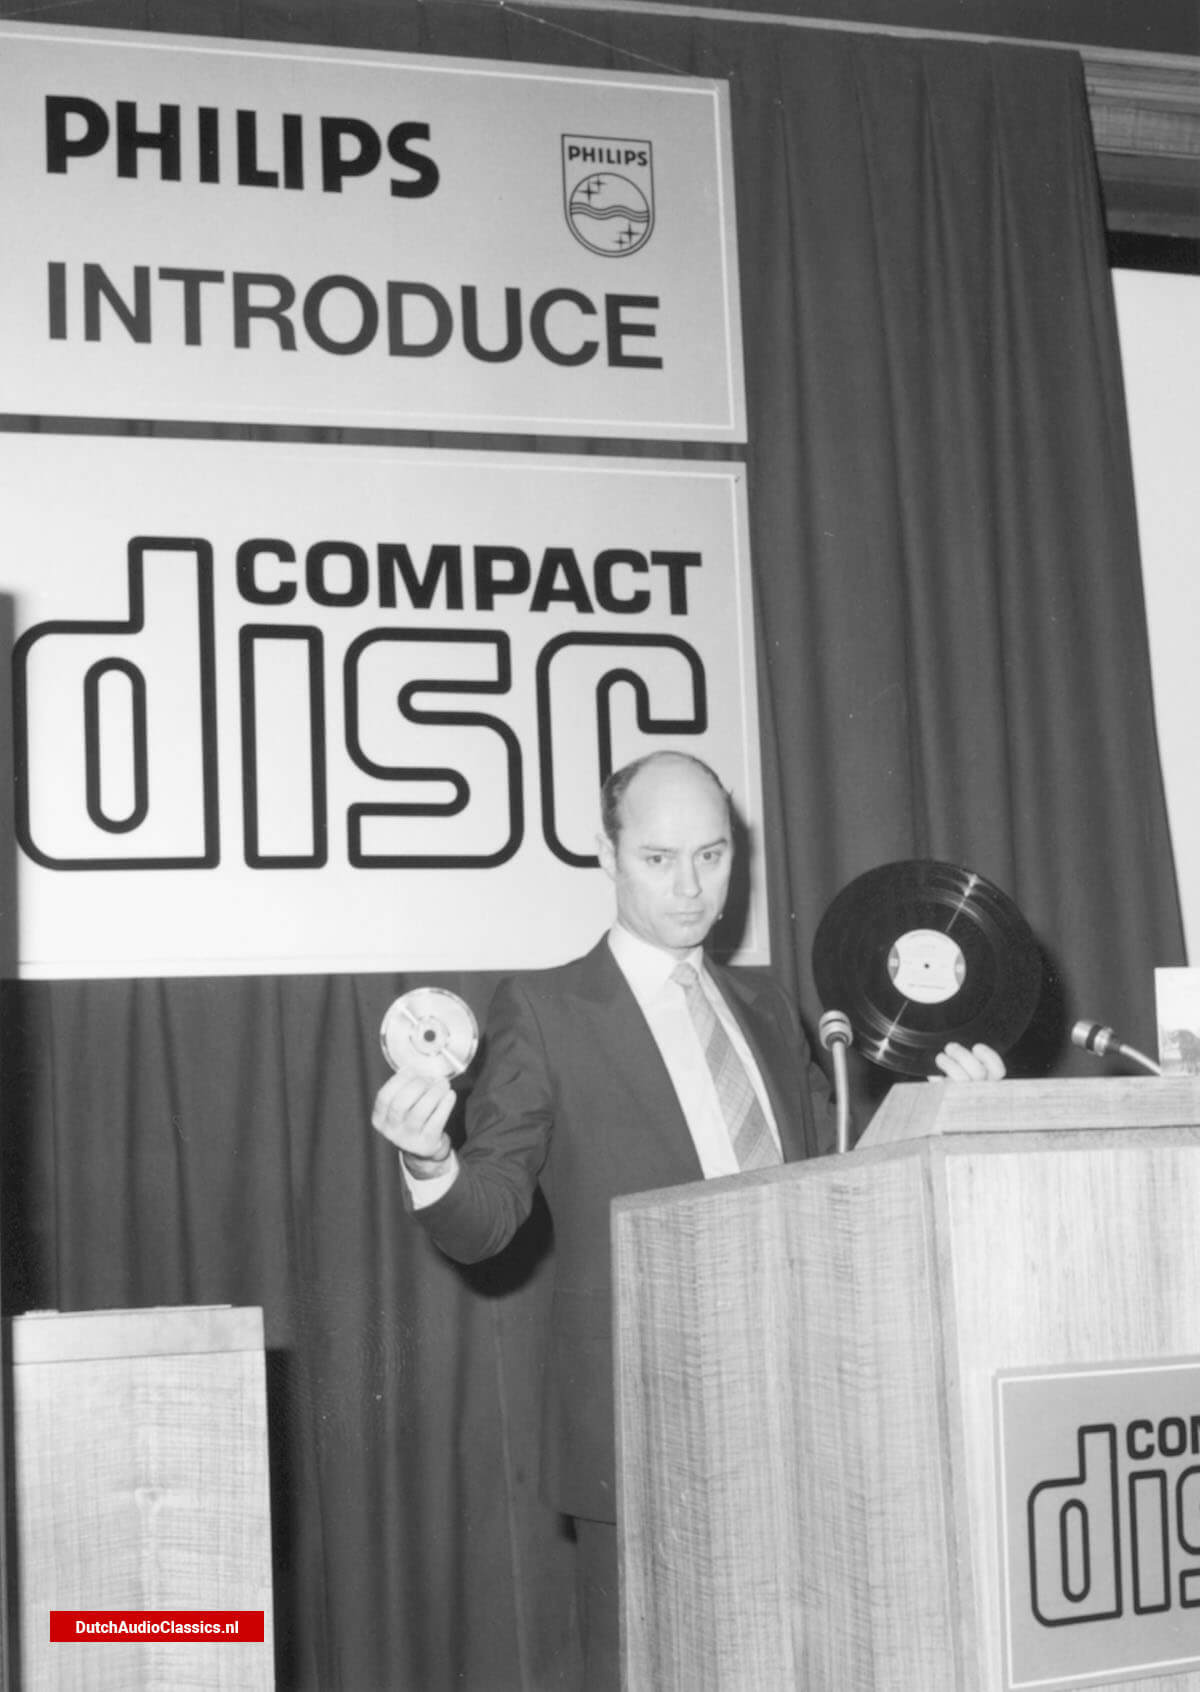 Perfecting the Compact Disc System - The six Philips/Sony - - DutchAudioClassics.nl